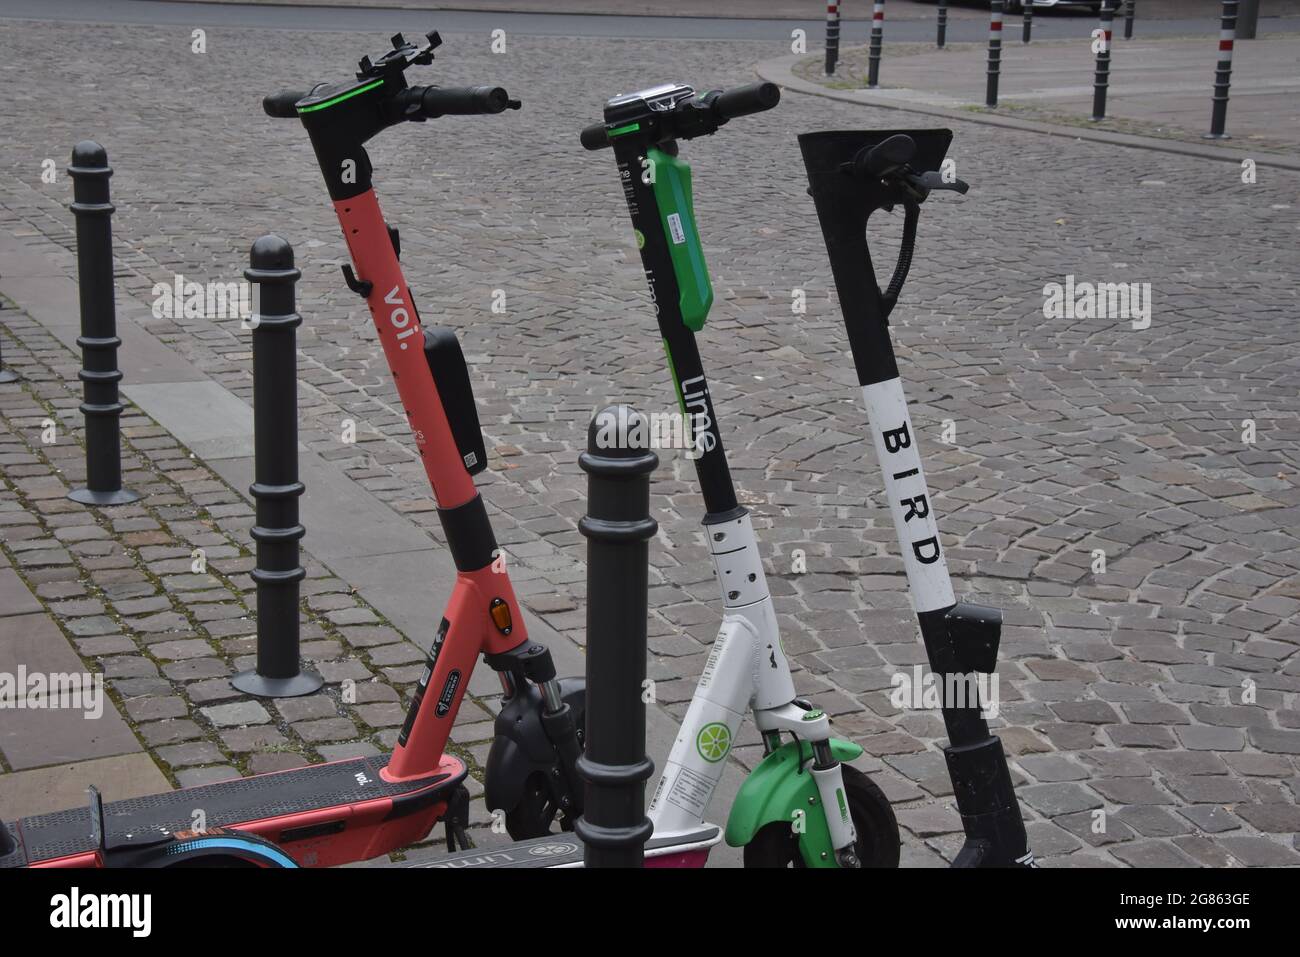 Cologne, Germany. 16th July, 2021. Rental e-scooters from Voi, Bird and  Lime are on the pavement Credit: Horst Galuschka/dpa/Alamy Live News Stock  Photo - Alamy